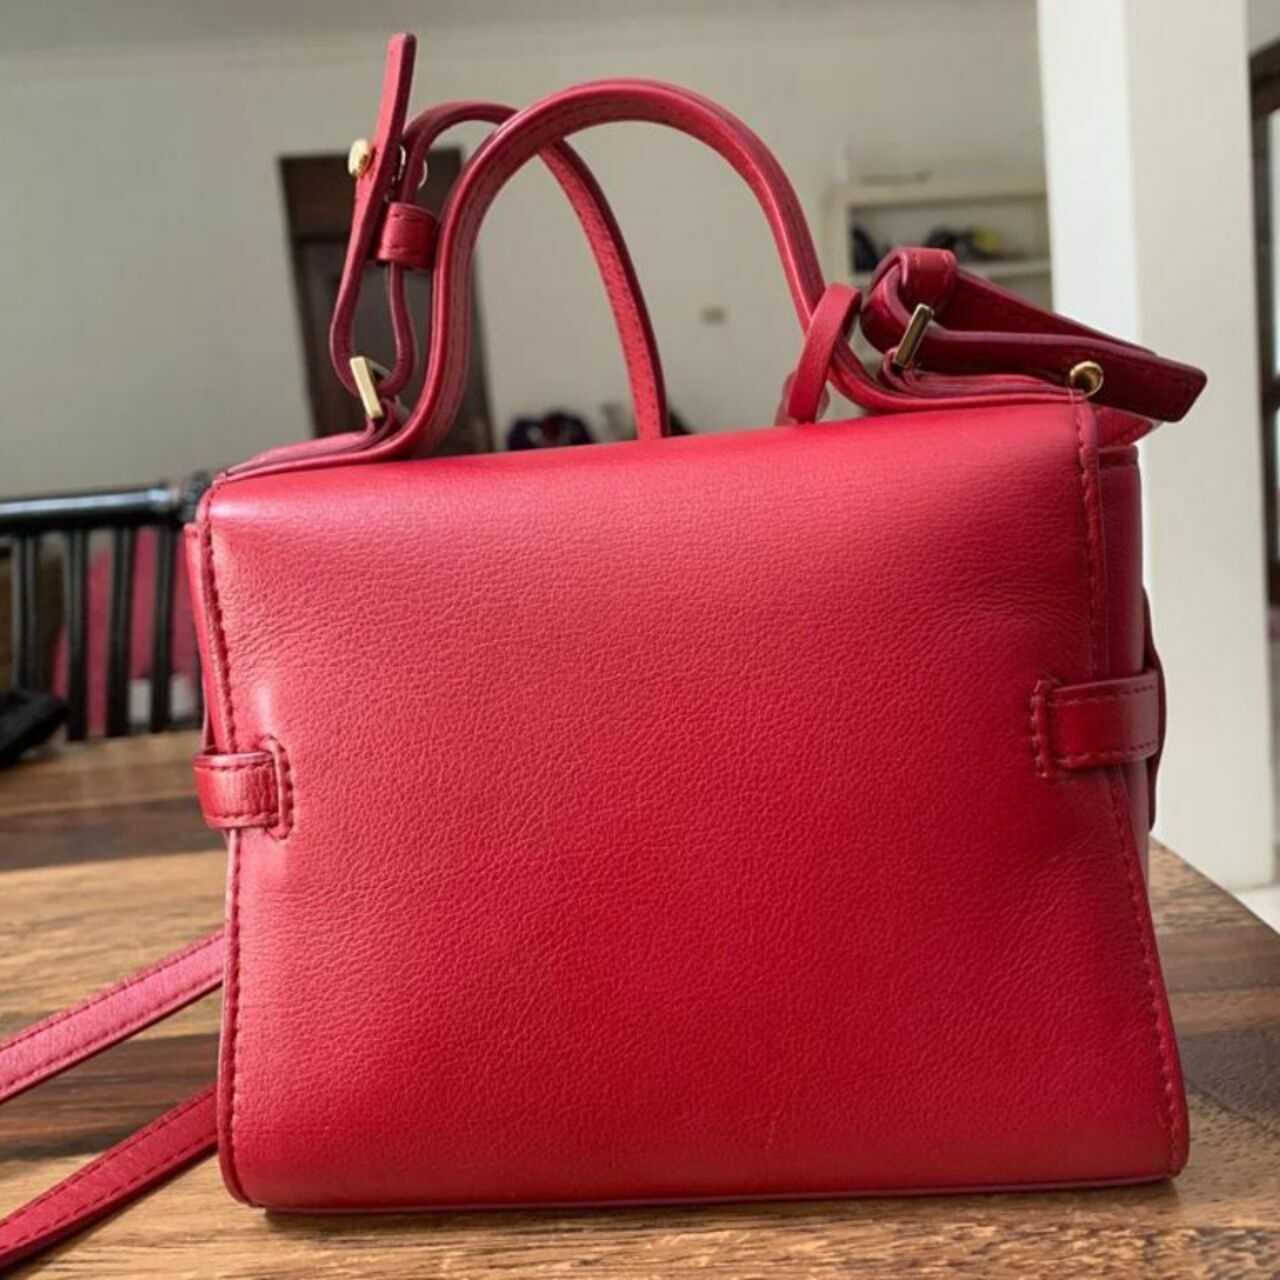 Delvaux Mini Tempete Berry -GHW - Red Sling Bag